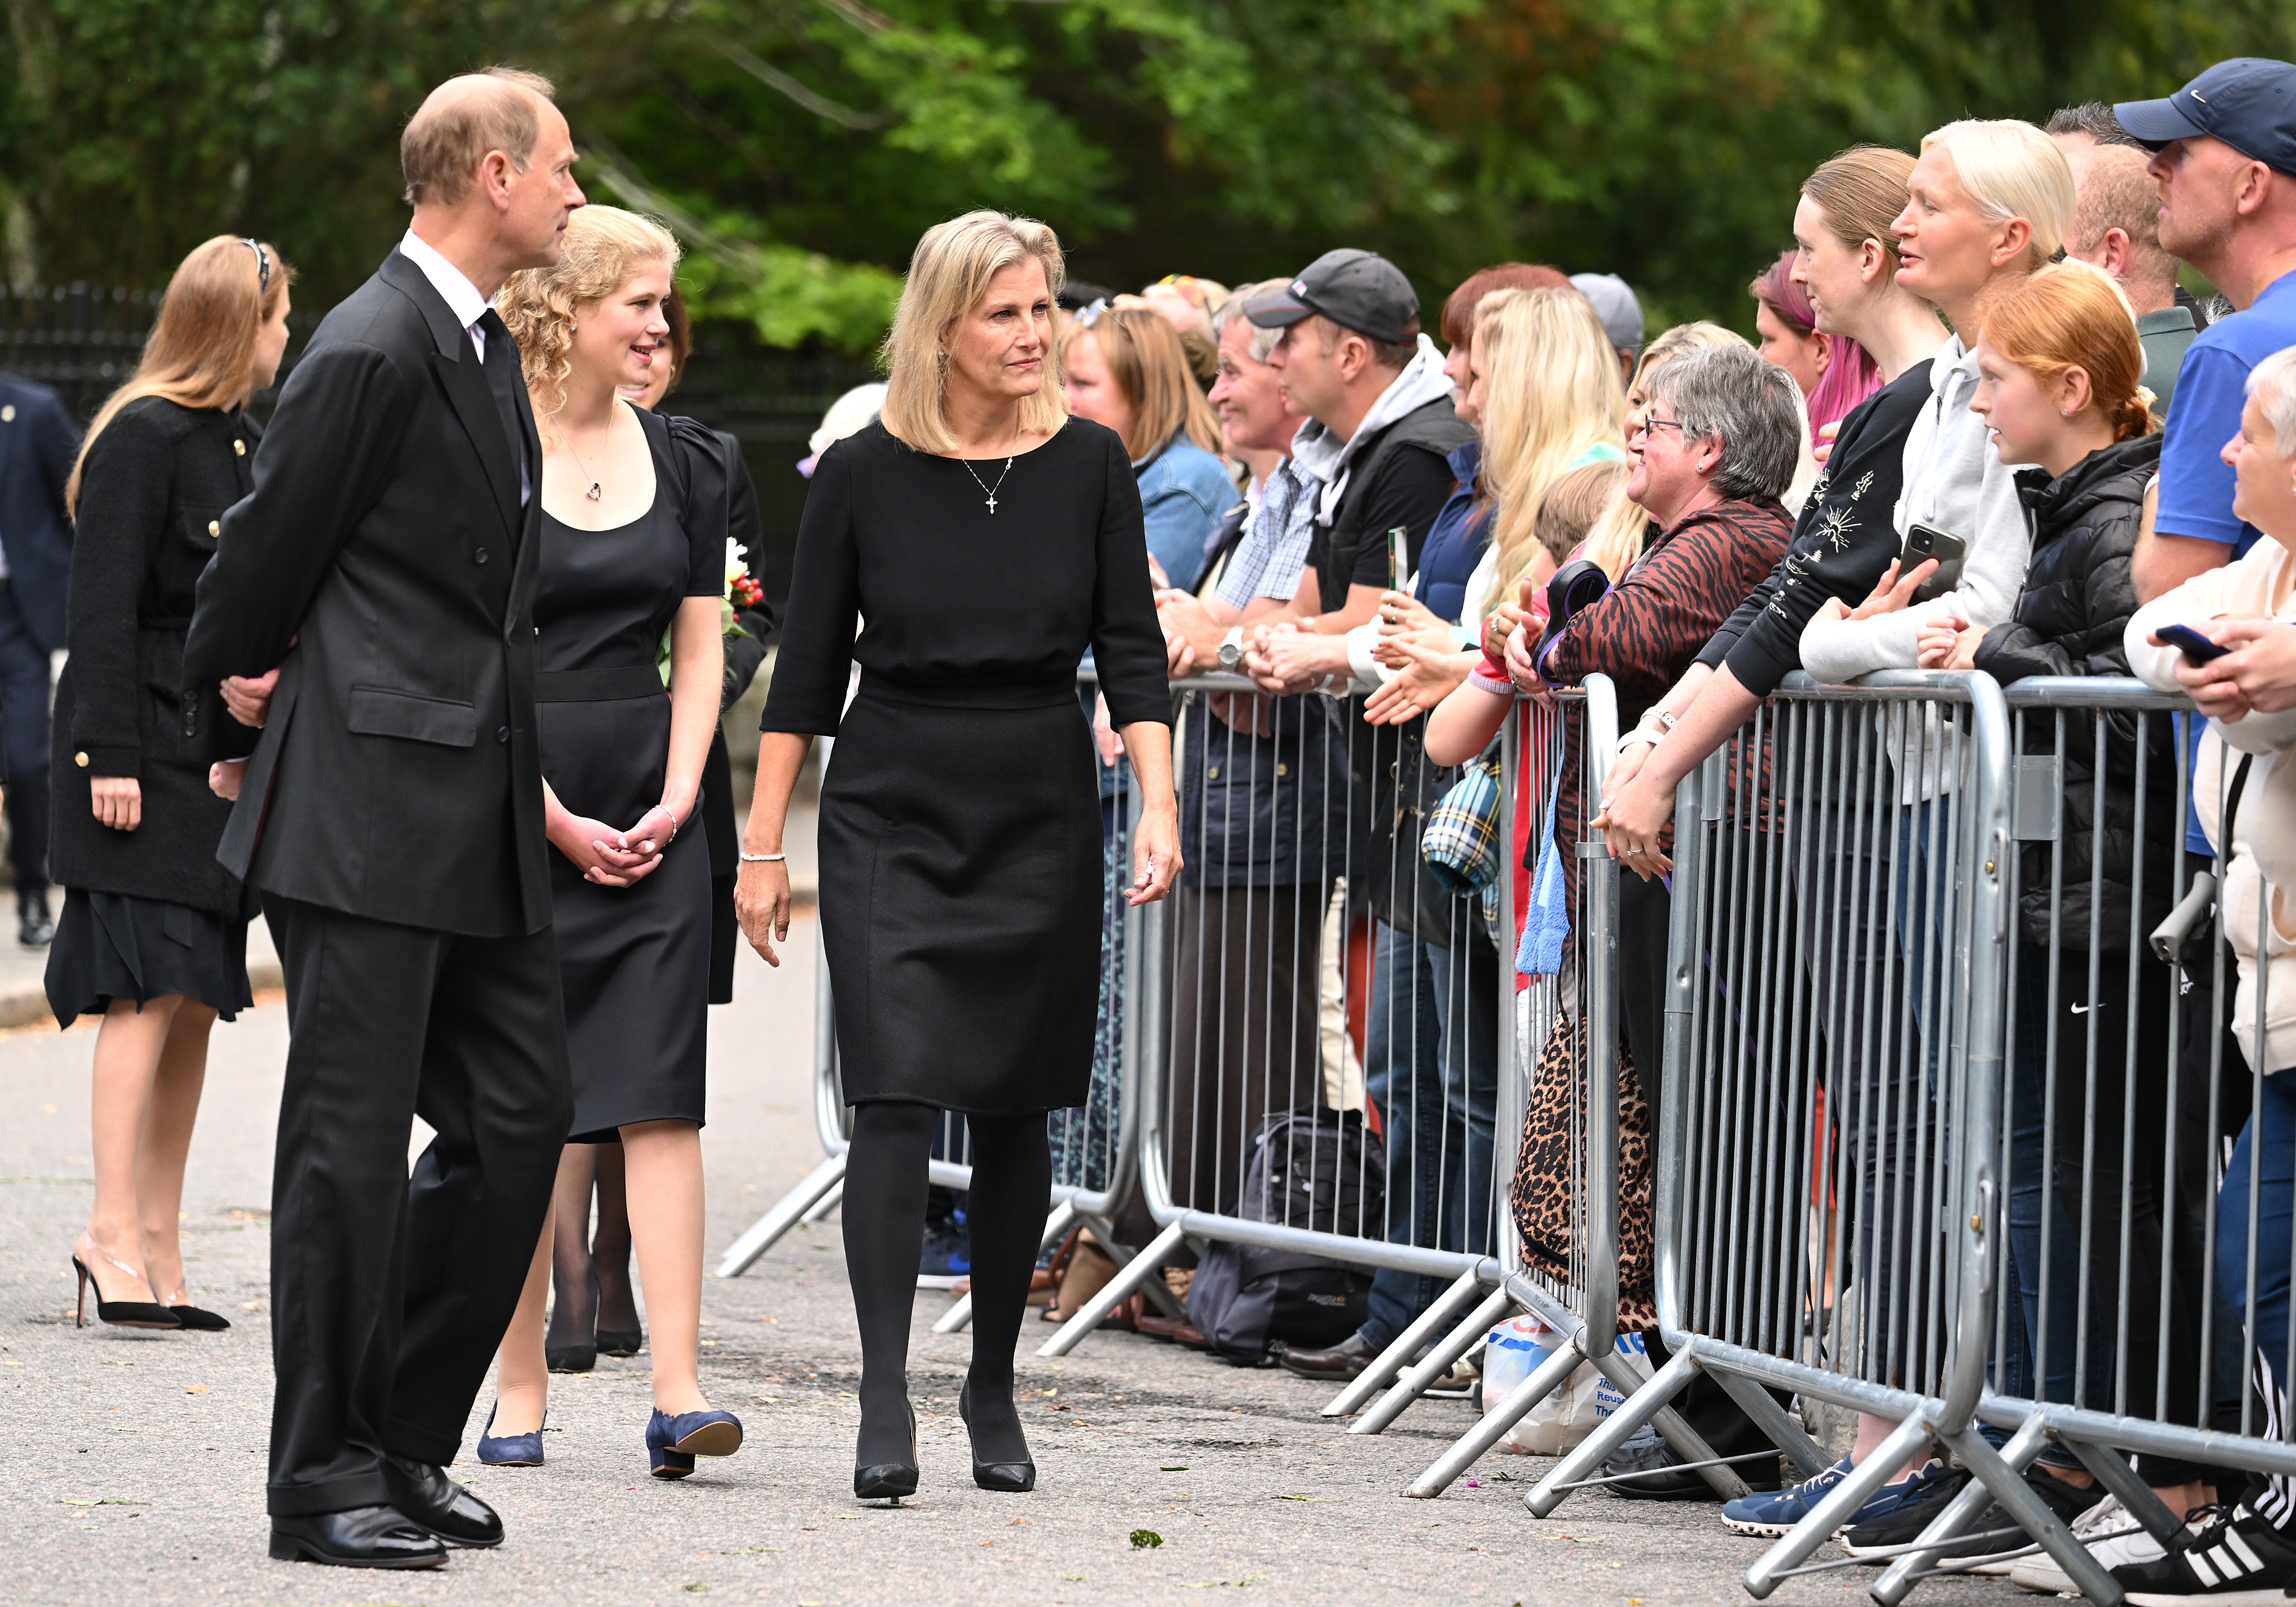 ABERDEEN, SCOTLAND - SEPTEMBER 10: Prince Edward, Earl of Wessex, Lady Louise Windsor and Sophie, Countess of Wessex depart Balmoral Castle for a church service at Crathie Kirk on September 10, 2022 in Aberdeenshire, Scotland. Elizabeth Alexandra Mary Win (Foto: WireImage)